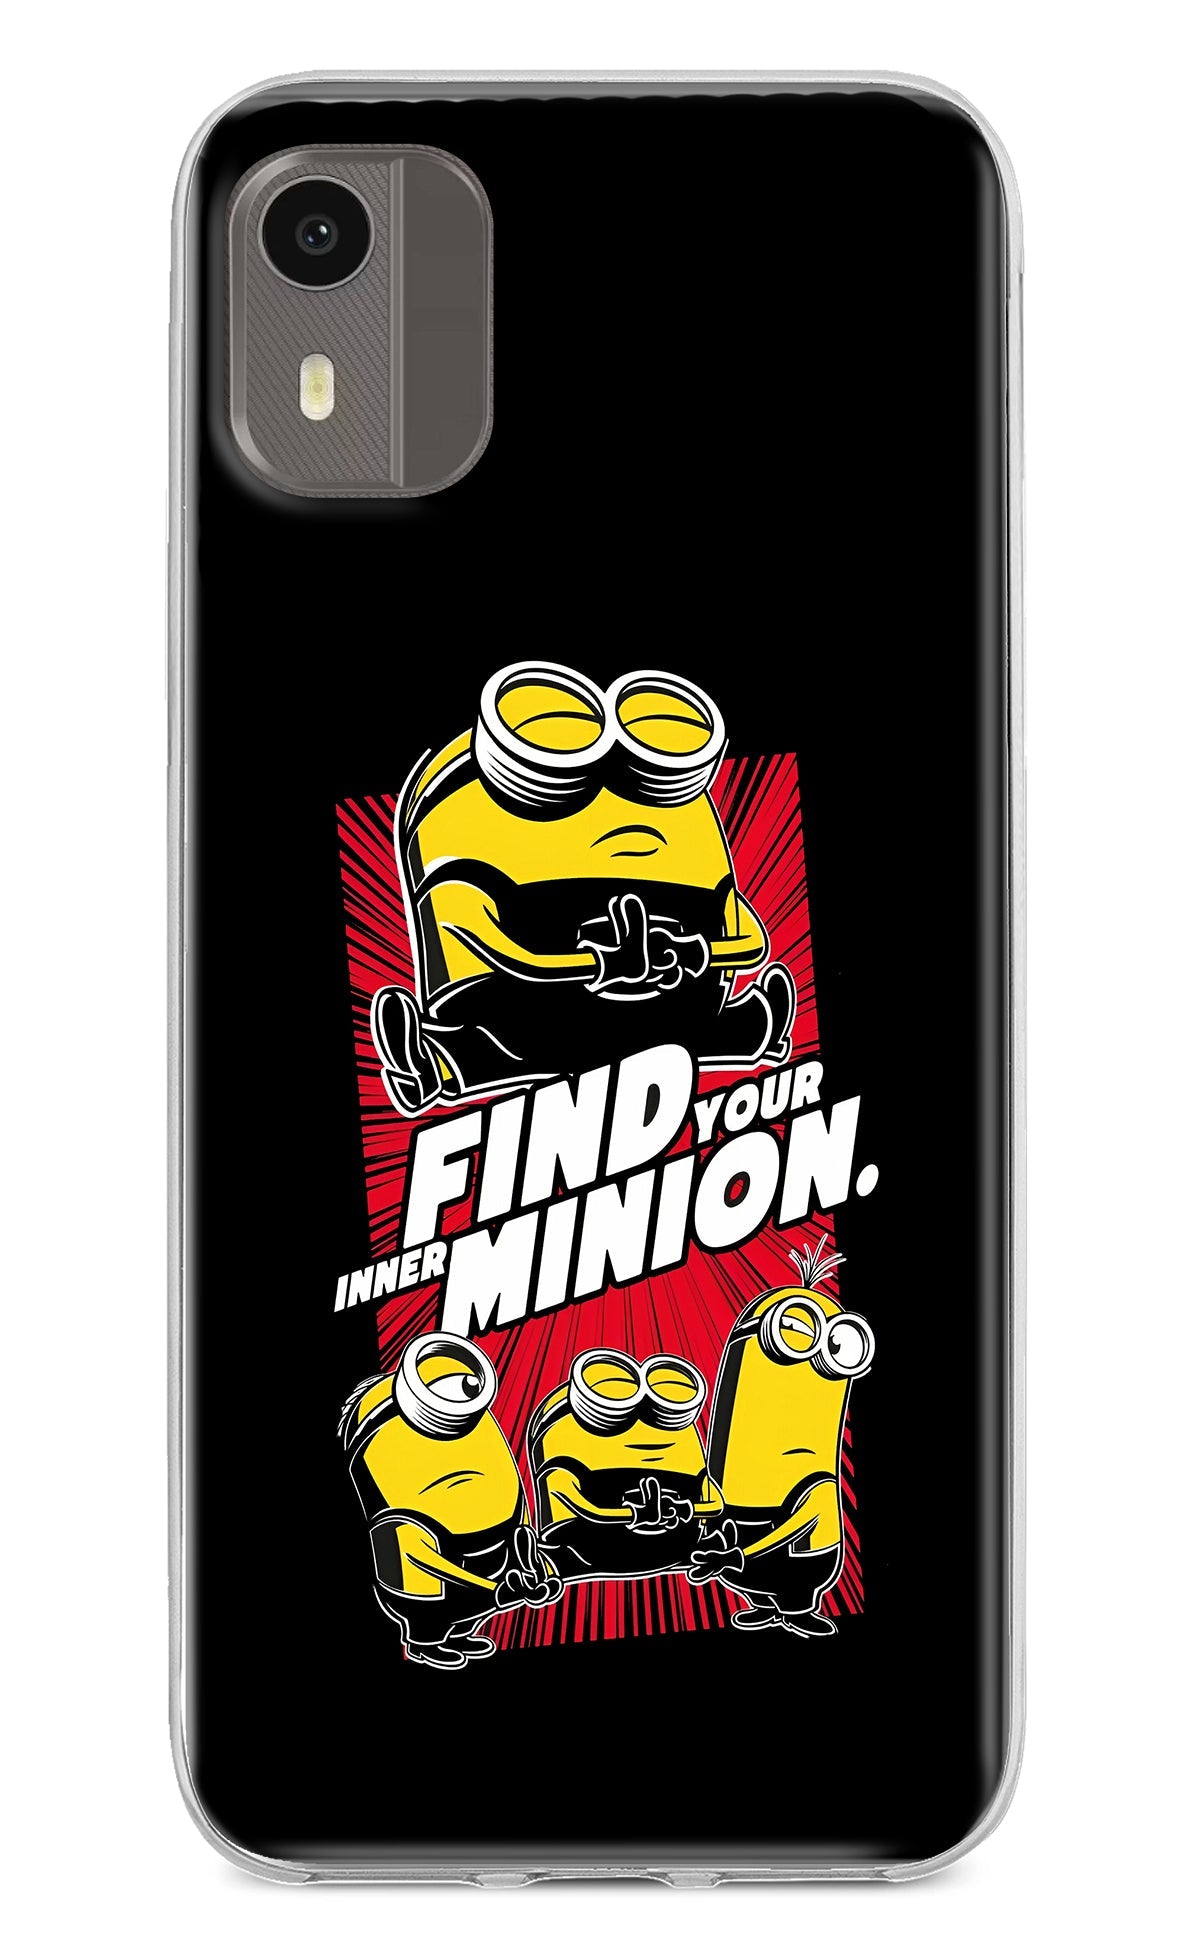 Find your inner Minion Nokia C12/C12 Pro Back Cover